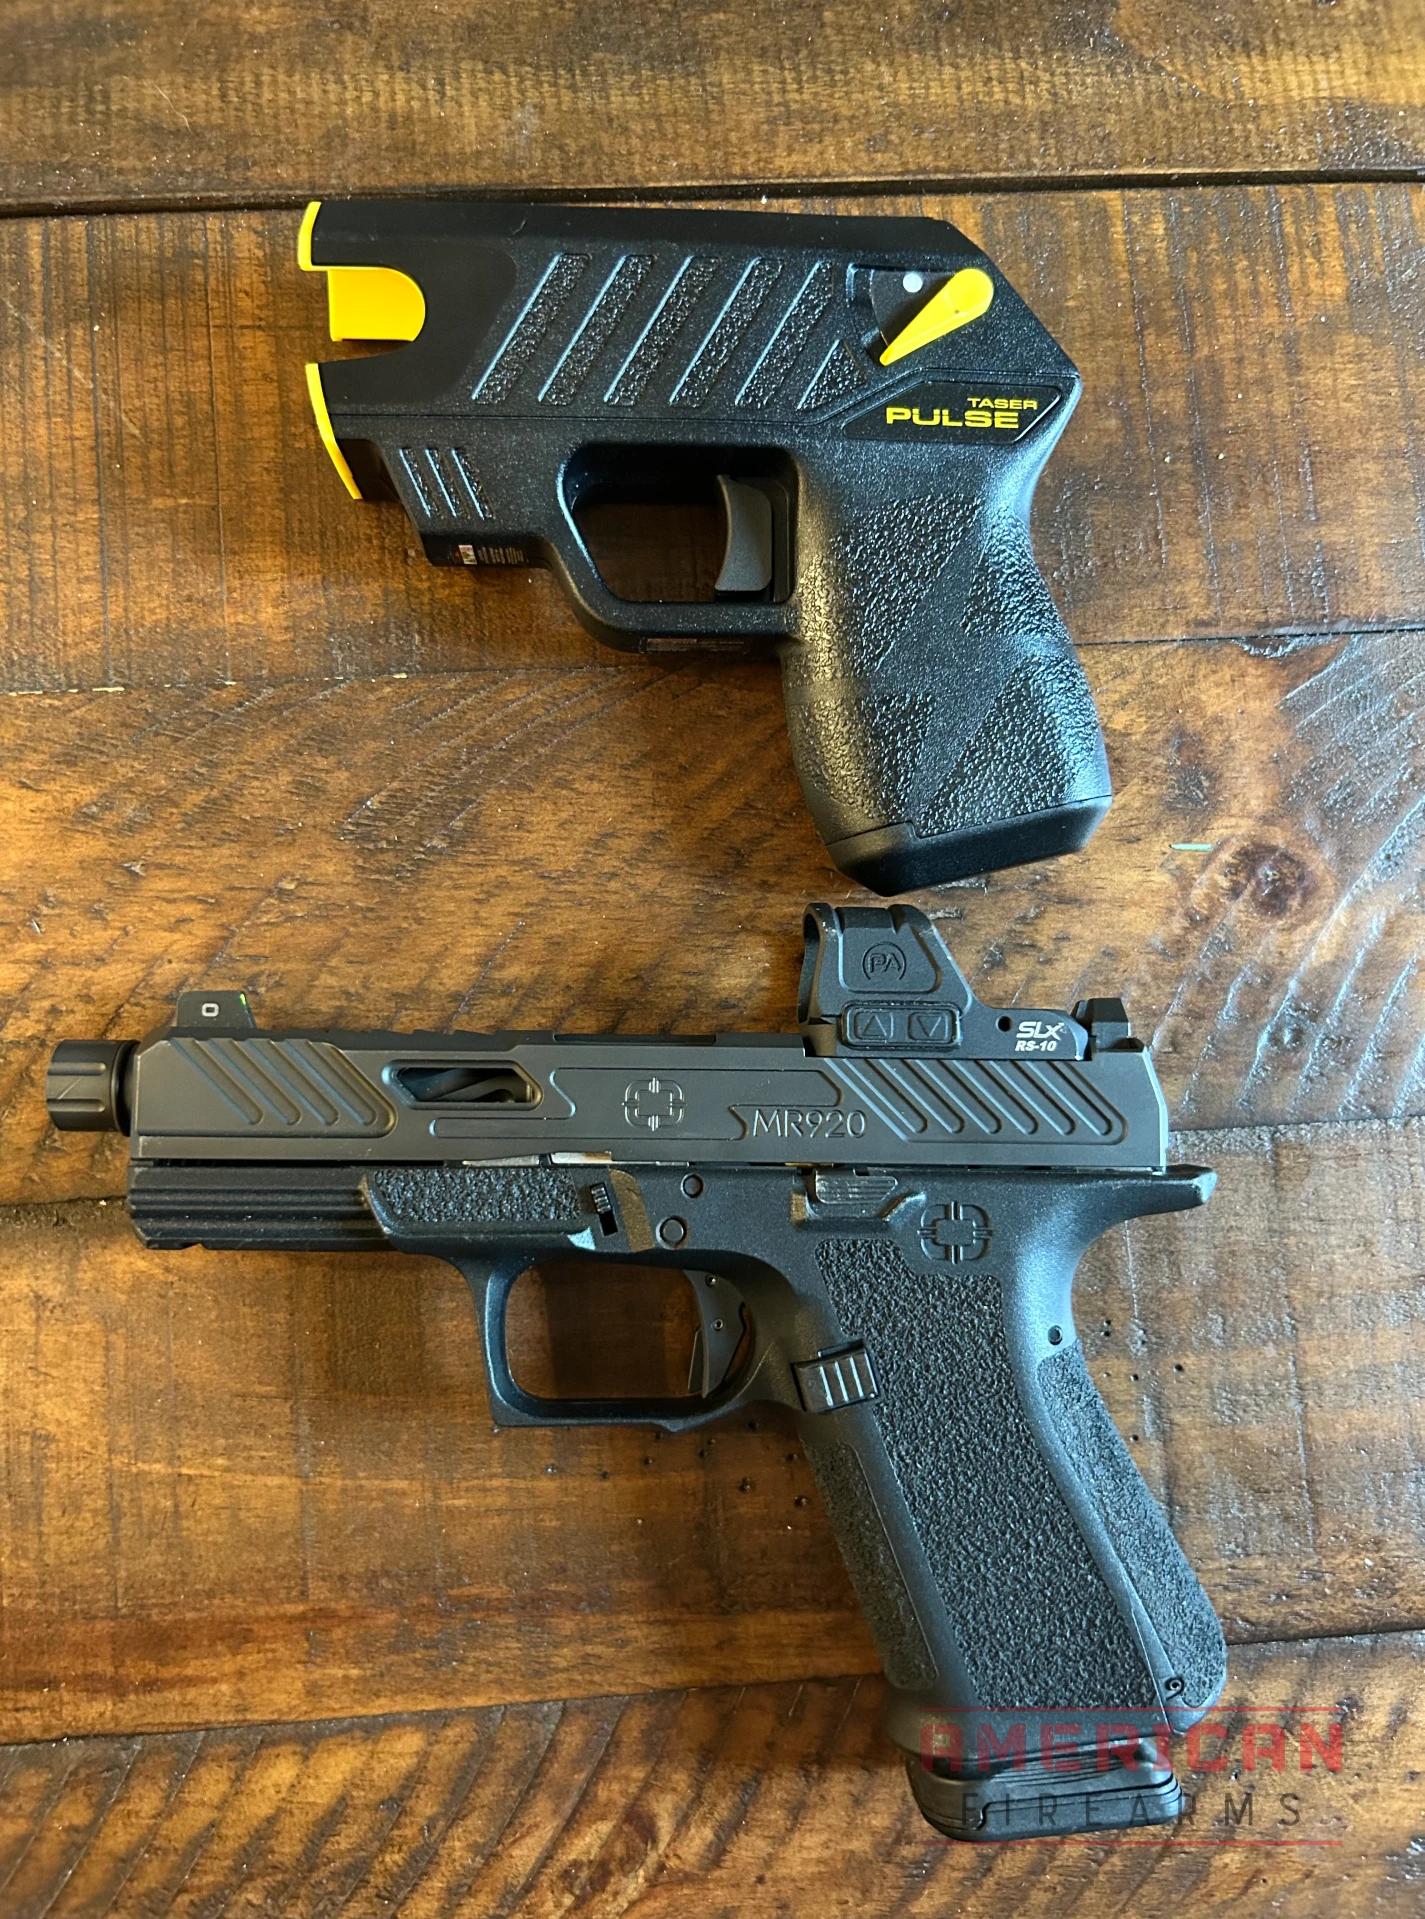 The TASER Pulse and my Shadow Systems MR920 (Glock 19 clone)